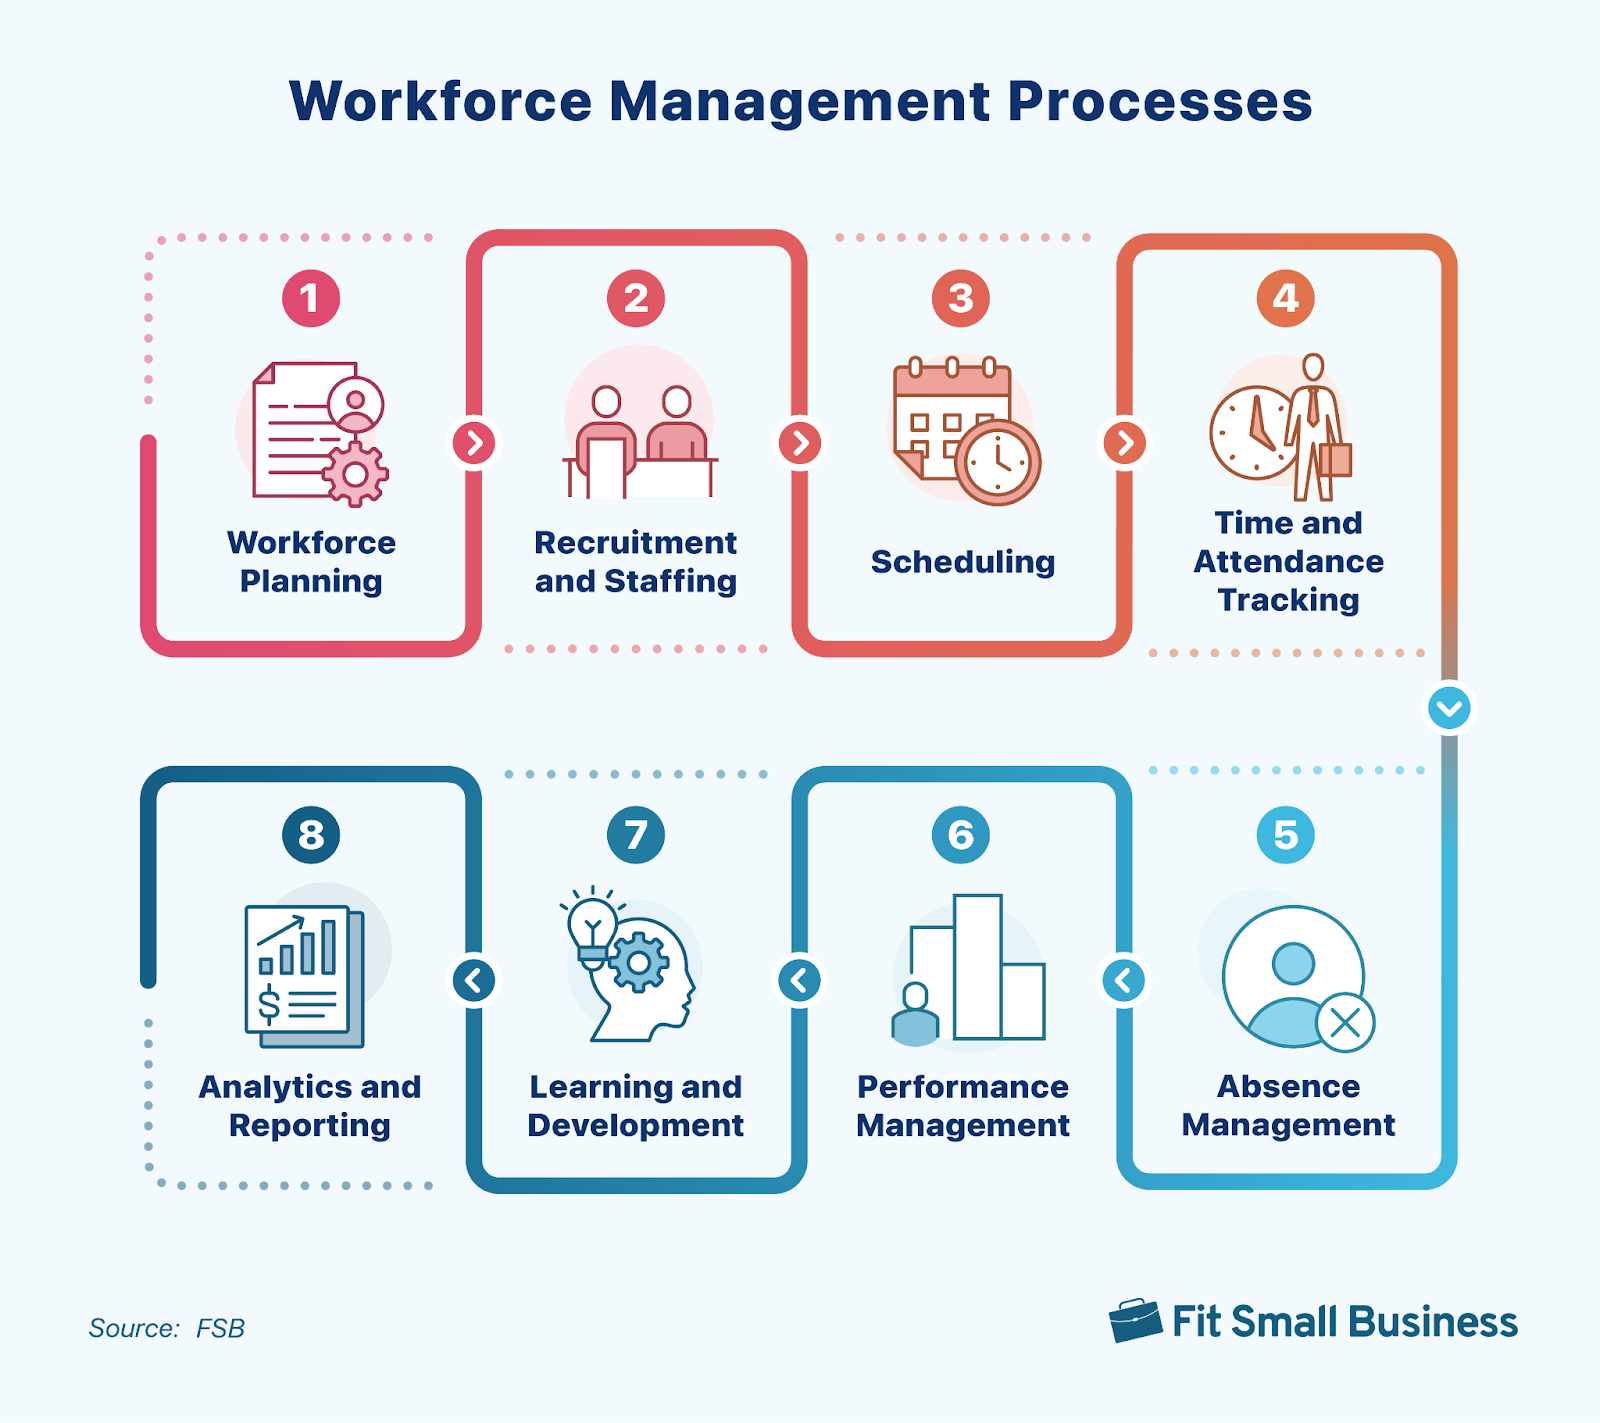 Visual representation of the Workforce Management Processes.